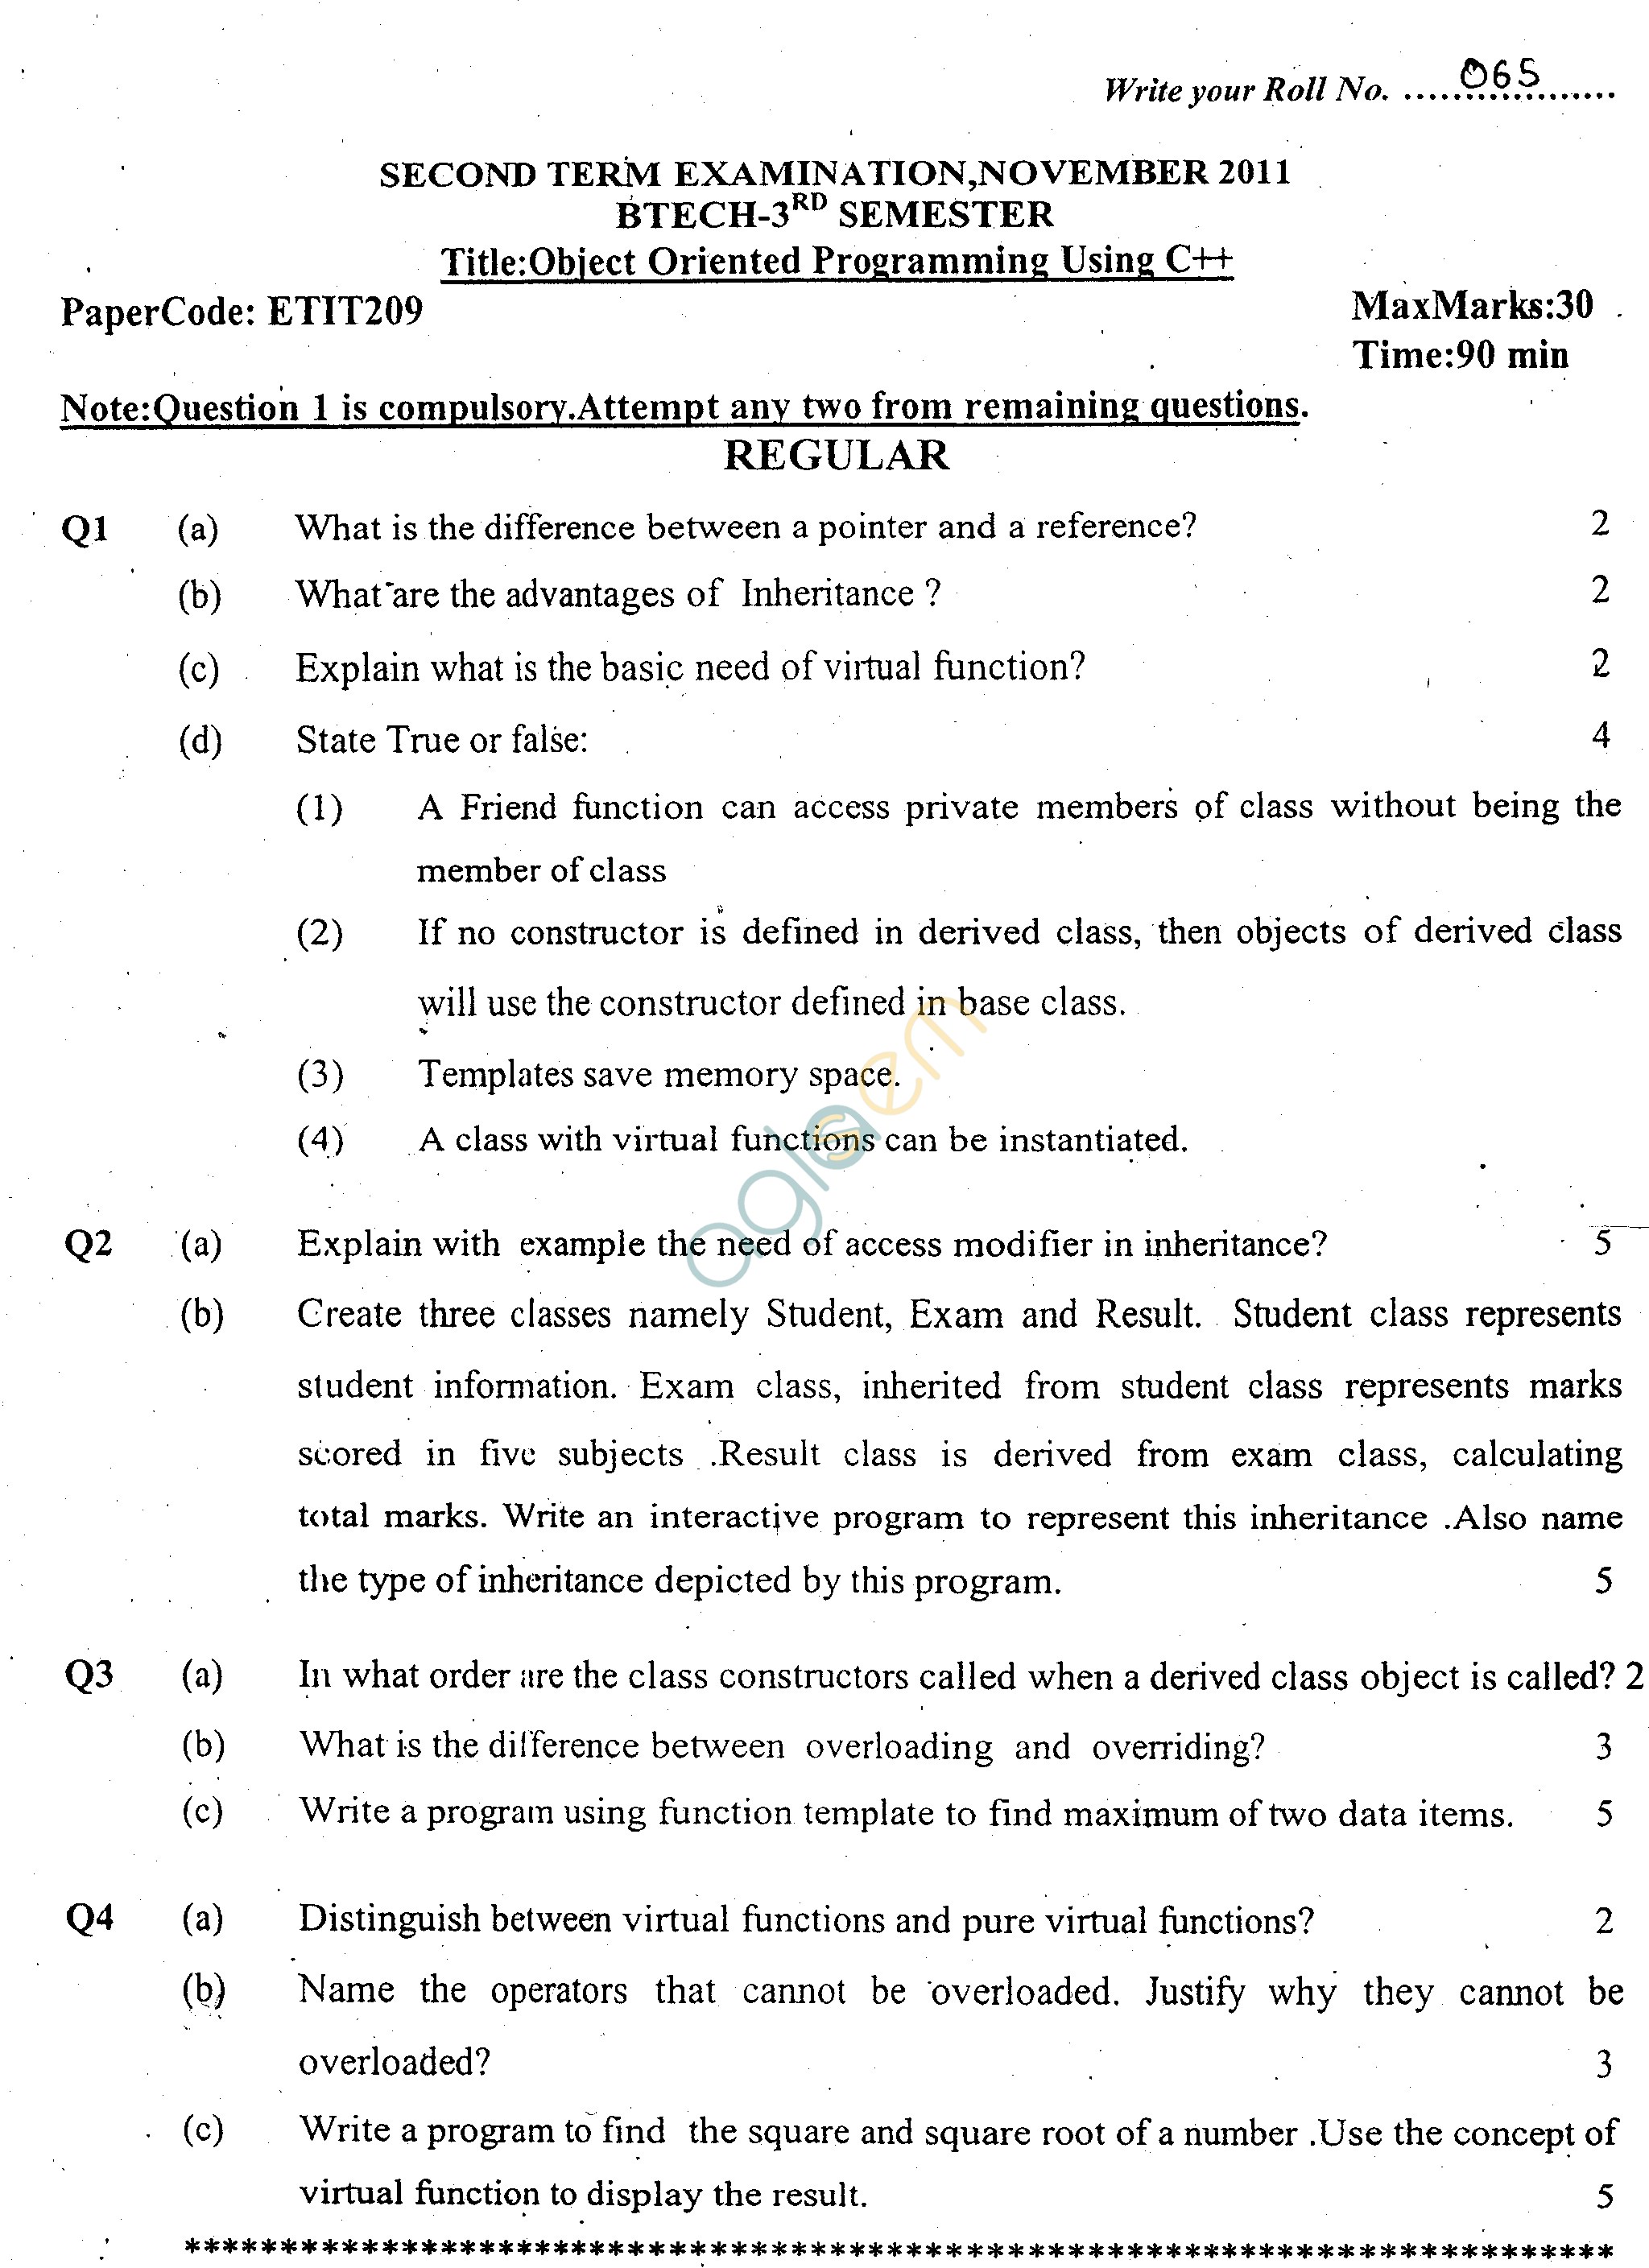 GGSIPU Question Papers Third Semester – Second Term 2011 – ETIT-209